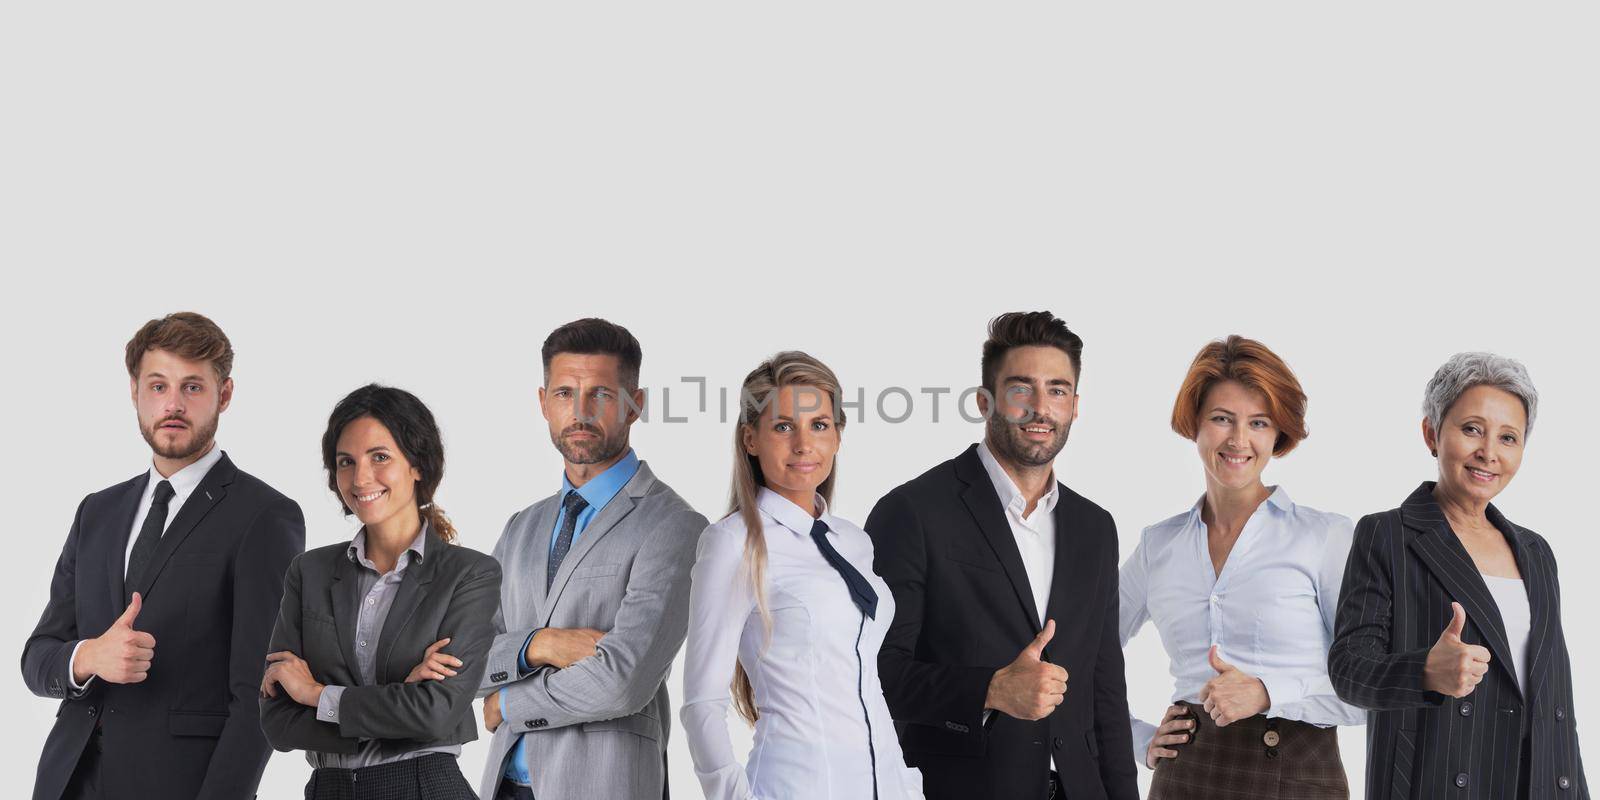 Group of business people with thumbs up sign standing together on gray background with copy space for text, unity cooperation teamwork concept